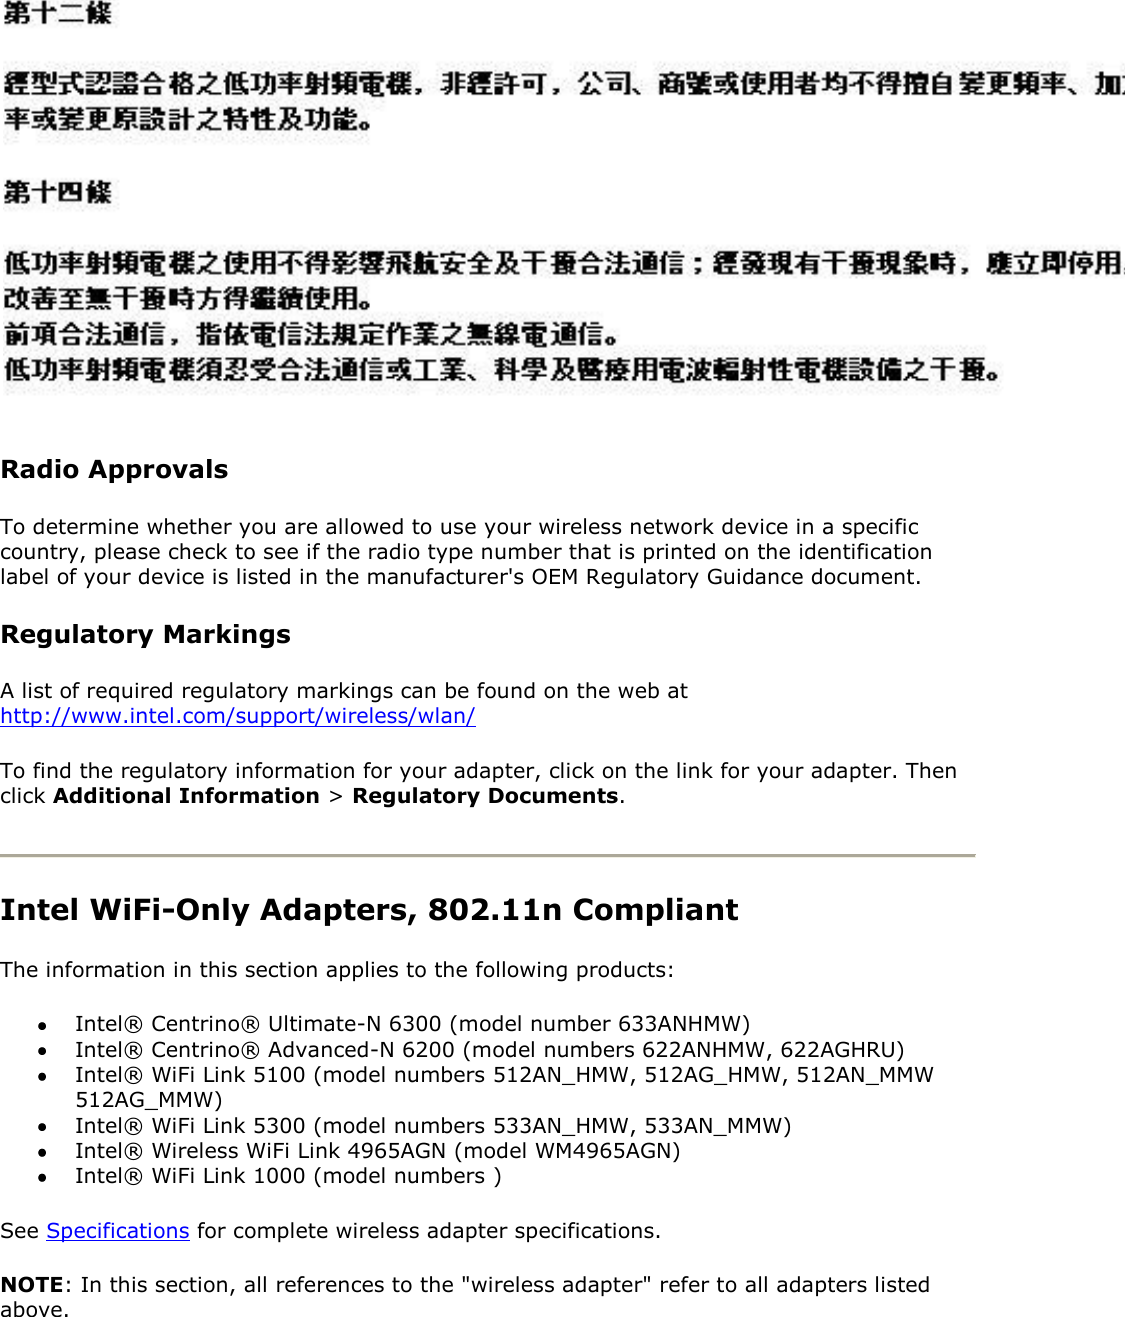  Radio Approvals To determine whether you are allowed to use your wireless network device in a specific country, please check to see if the radio type number that is printed on the identification label of your device is listed in the manufacturer&apos;s OEM Regulatory Guidance document. Regulatory Markings A list of required regulatory markings can be found on the web at http://www.intel.com/support/wireless/wlan/ To find the regulatory information for your adapter, click on the link for your adapter. Then click Additional Information &gt; Regulatory Documents.   Intel WiFi-Only Adapters, 802.11n Compliant  The information in this section applies to the following products:  Intel® Centrino® Ultimate-N 6300 (model number 633ANHMW)  Intel® Centrino® Advanced-N 6200 (model numbers 622ANHMW, 622AGHRU)  Intel® WiFi Link 5100 (model numbers 512AN_HMW, 512AG_HMW, 512AN_MMW 512AG_MMW)  Intel® WiFi Link 5300 (model numbers 533AN_HMW, 533AN_MMW)  Intel® Wireless WiFi Link 4965AGN (model WM4965AGN)  Intel® WiFi Link 1000 (model numbers )  See Specifications for complete wireless adapter specifications.  NOTE: In this section, all references to the &quot;wireless adapter&quot; refer to all adapters listed above. 